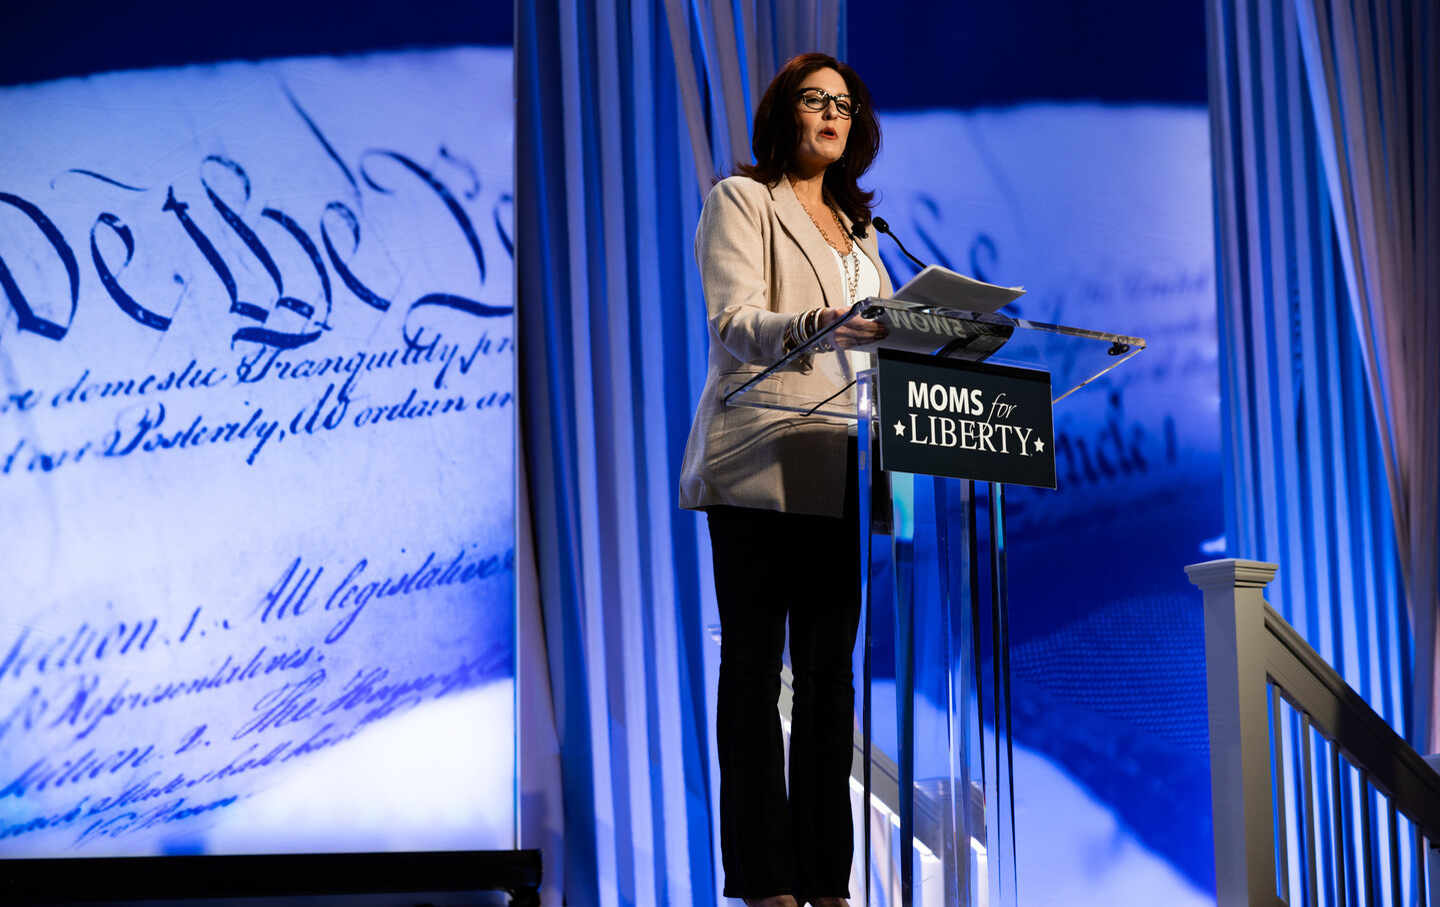 Cofounder of Moms for Liberty Tiffany Justice speaks ahead of former US Ppresident and Republican presidential candidate Donald Trump at the Moms for Liberty Summit in Philadelphia, Pa., 2023.